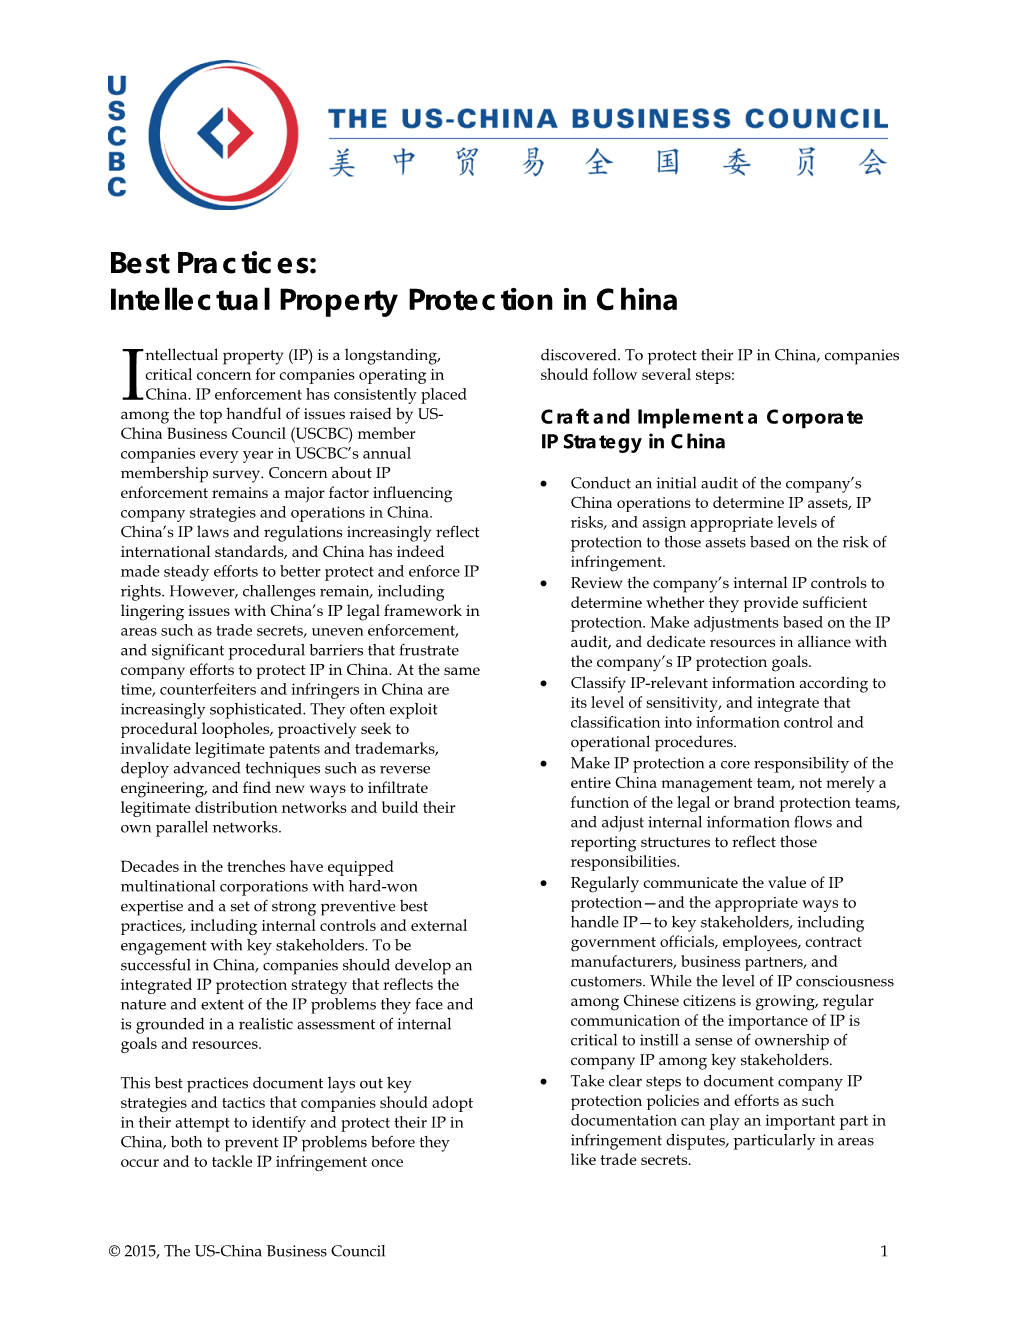 Best Practices for Intellectual Property Protection in China